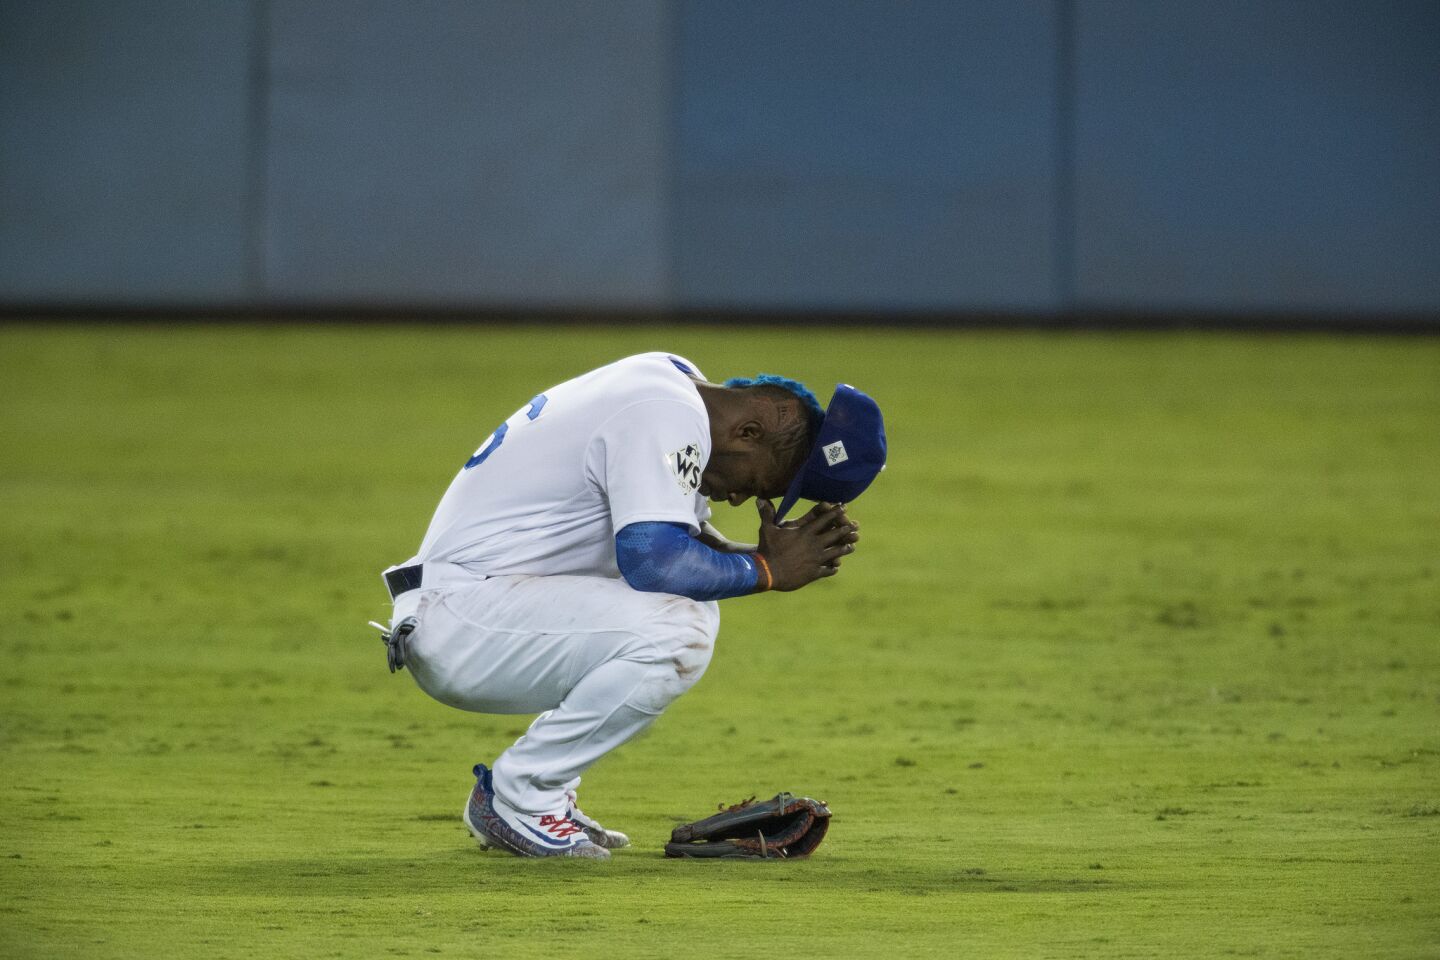 Yasiel Puig sits with his head in his hands after not being able to catch what turned into a ground-rule double off the bat of Astros third baseman Alex Bregman during the seventh inning.